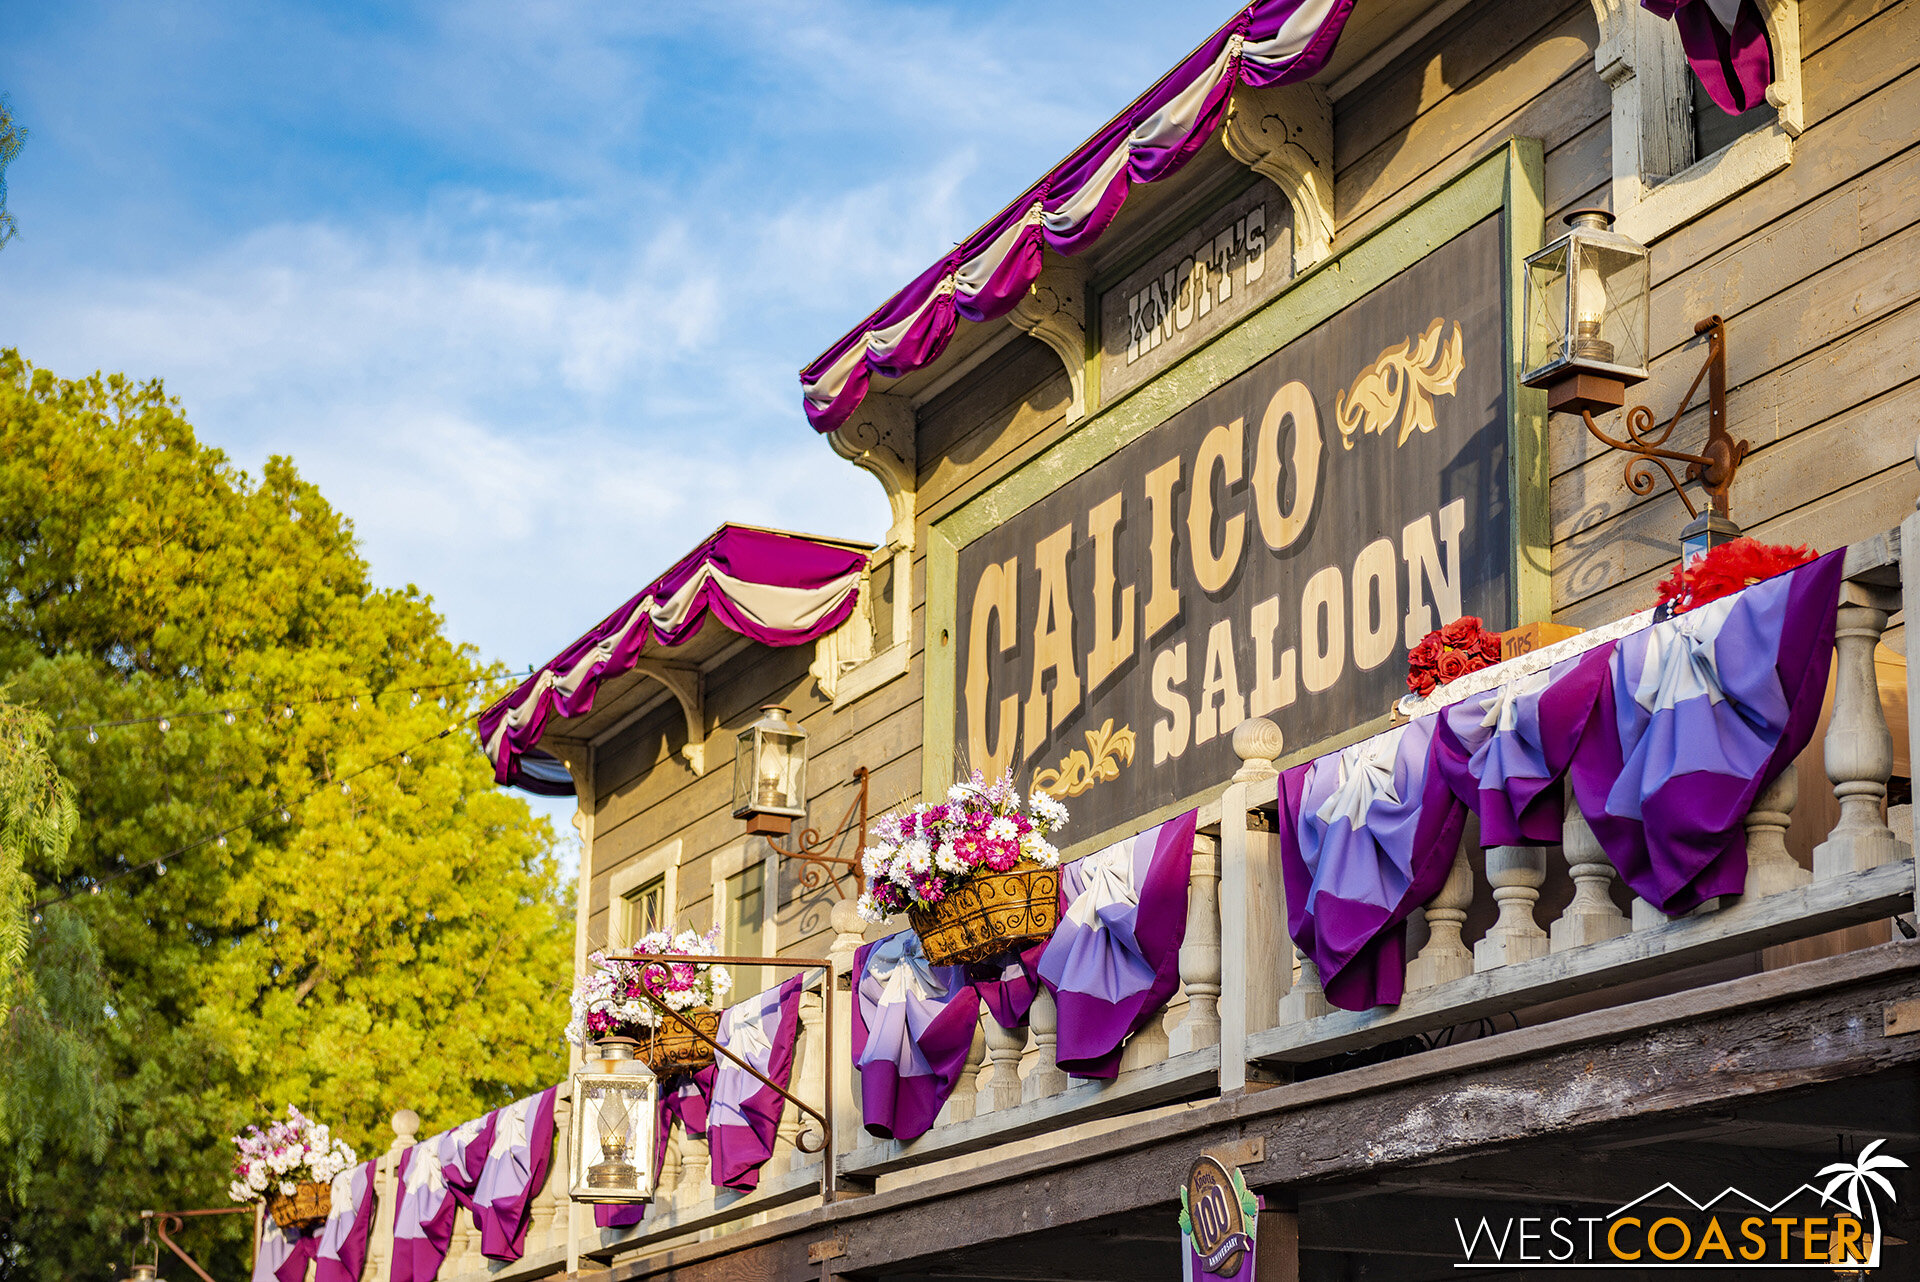  Look for characters up on the Calico Saloon balcony too! 